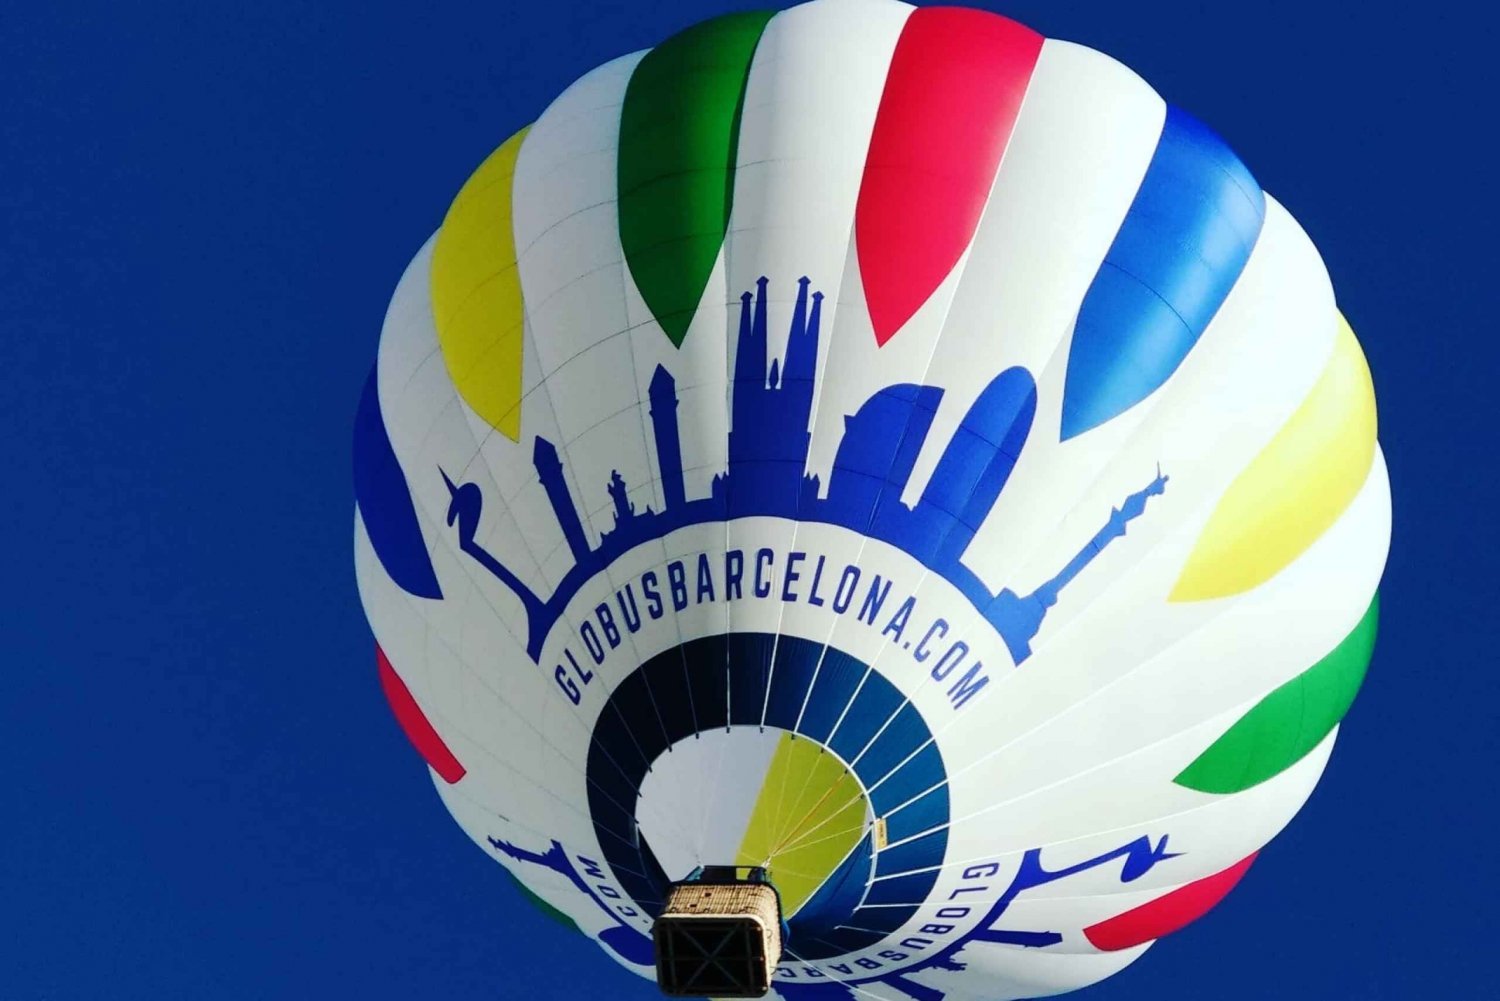 Private Balloon Flight for Two from Barcelona